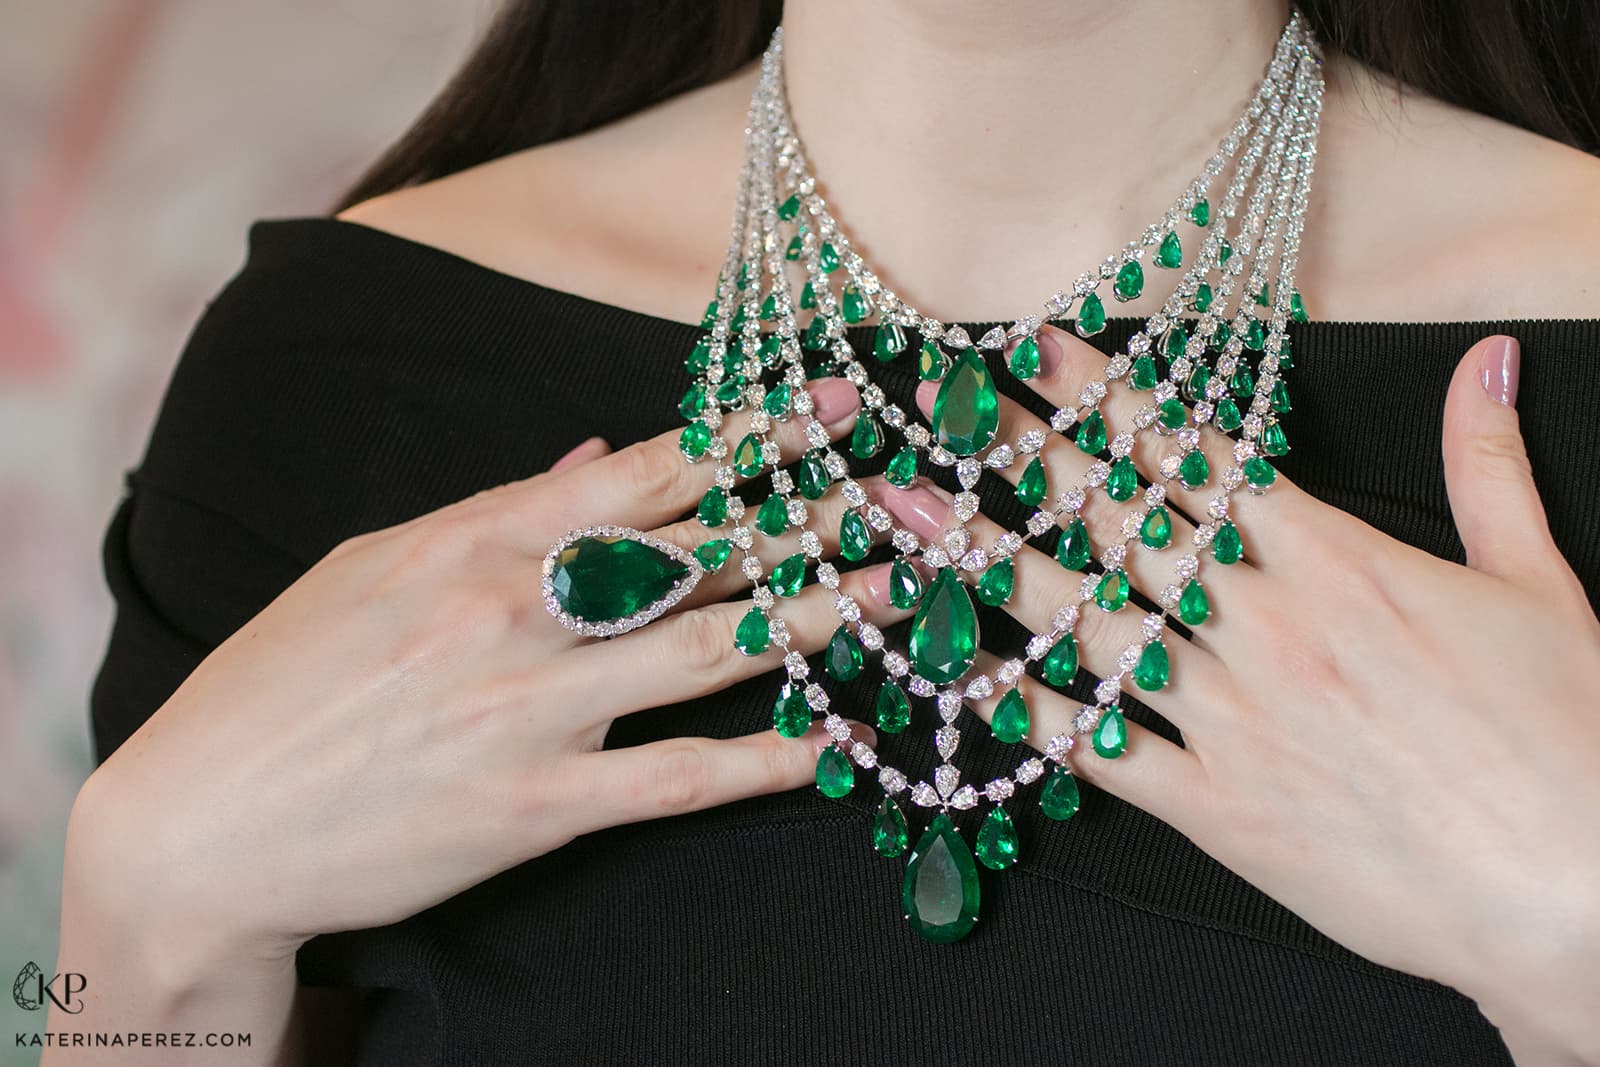 Chopard ‘Red Carpet’ collection necklace with pear cut cabochon emeralds, emeralds and diamonds